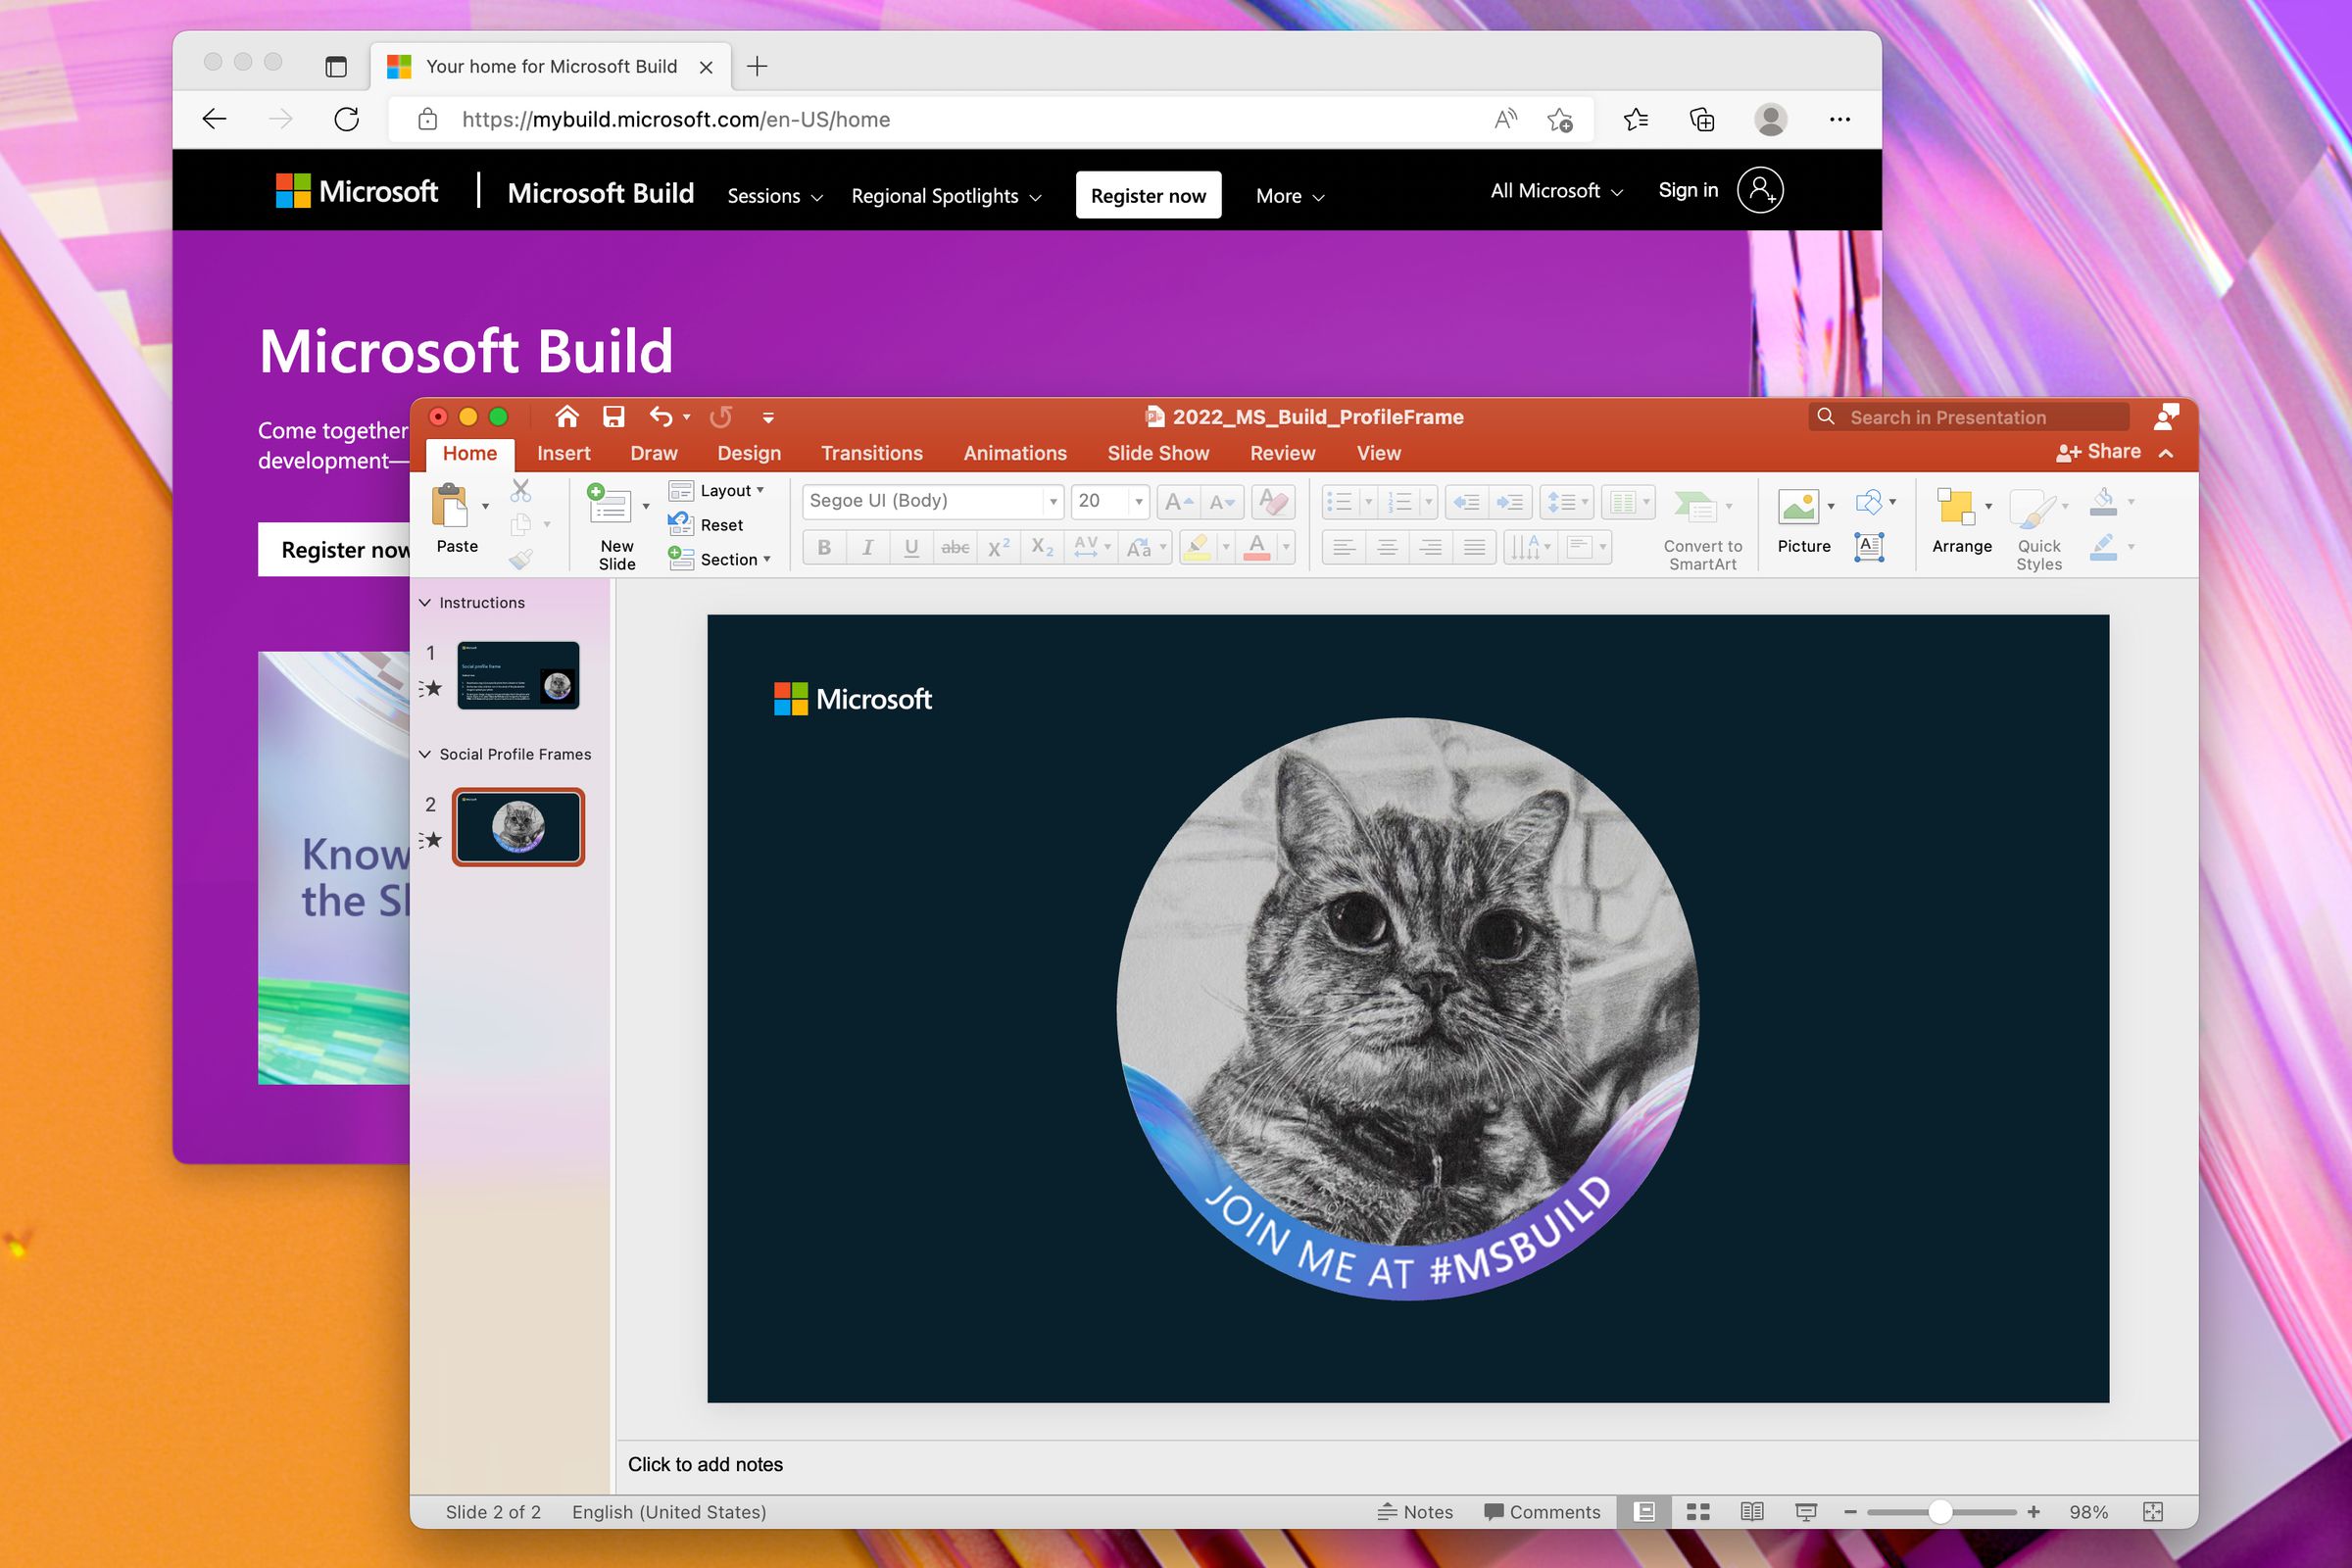 Microsoft’s Build social media profile template has a cute cat as a placeholder. You can download it here (warning: 75MB zip file) along with themed wallpapers and Teams backgrounds.